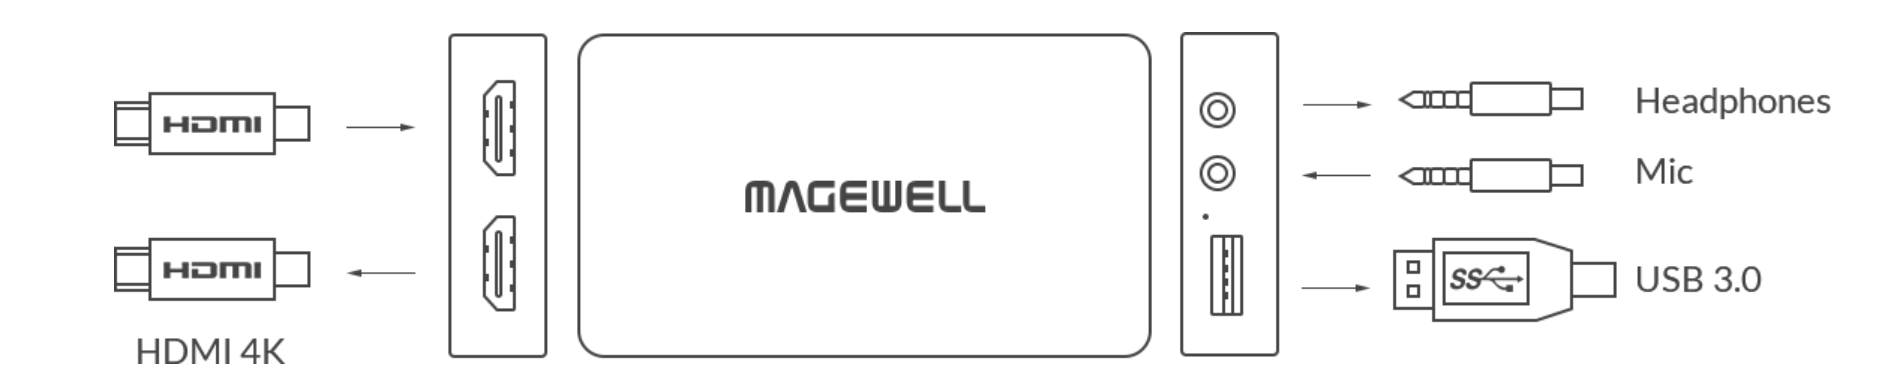 Magewell USB Capture for HDMI